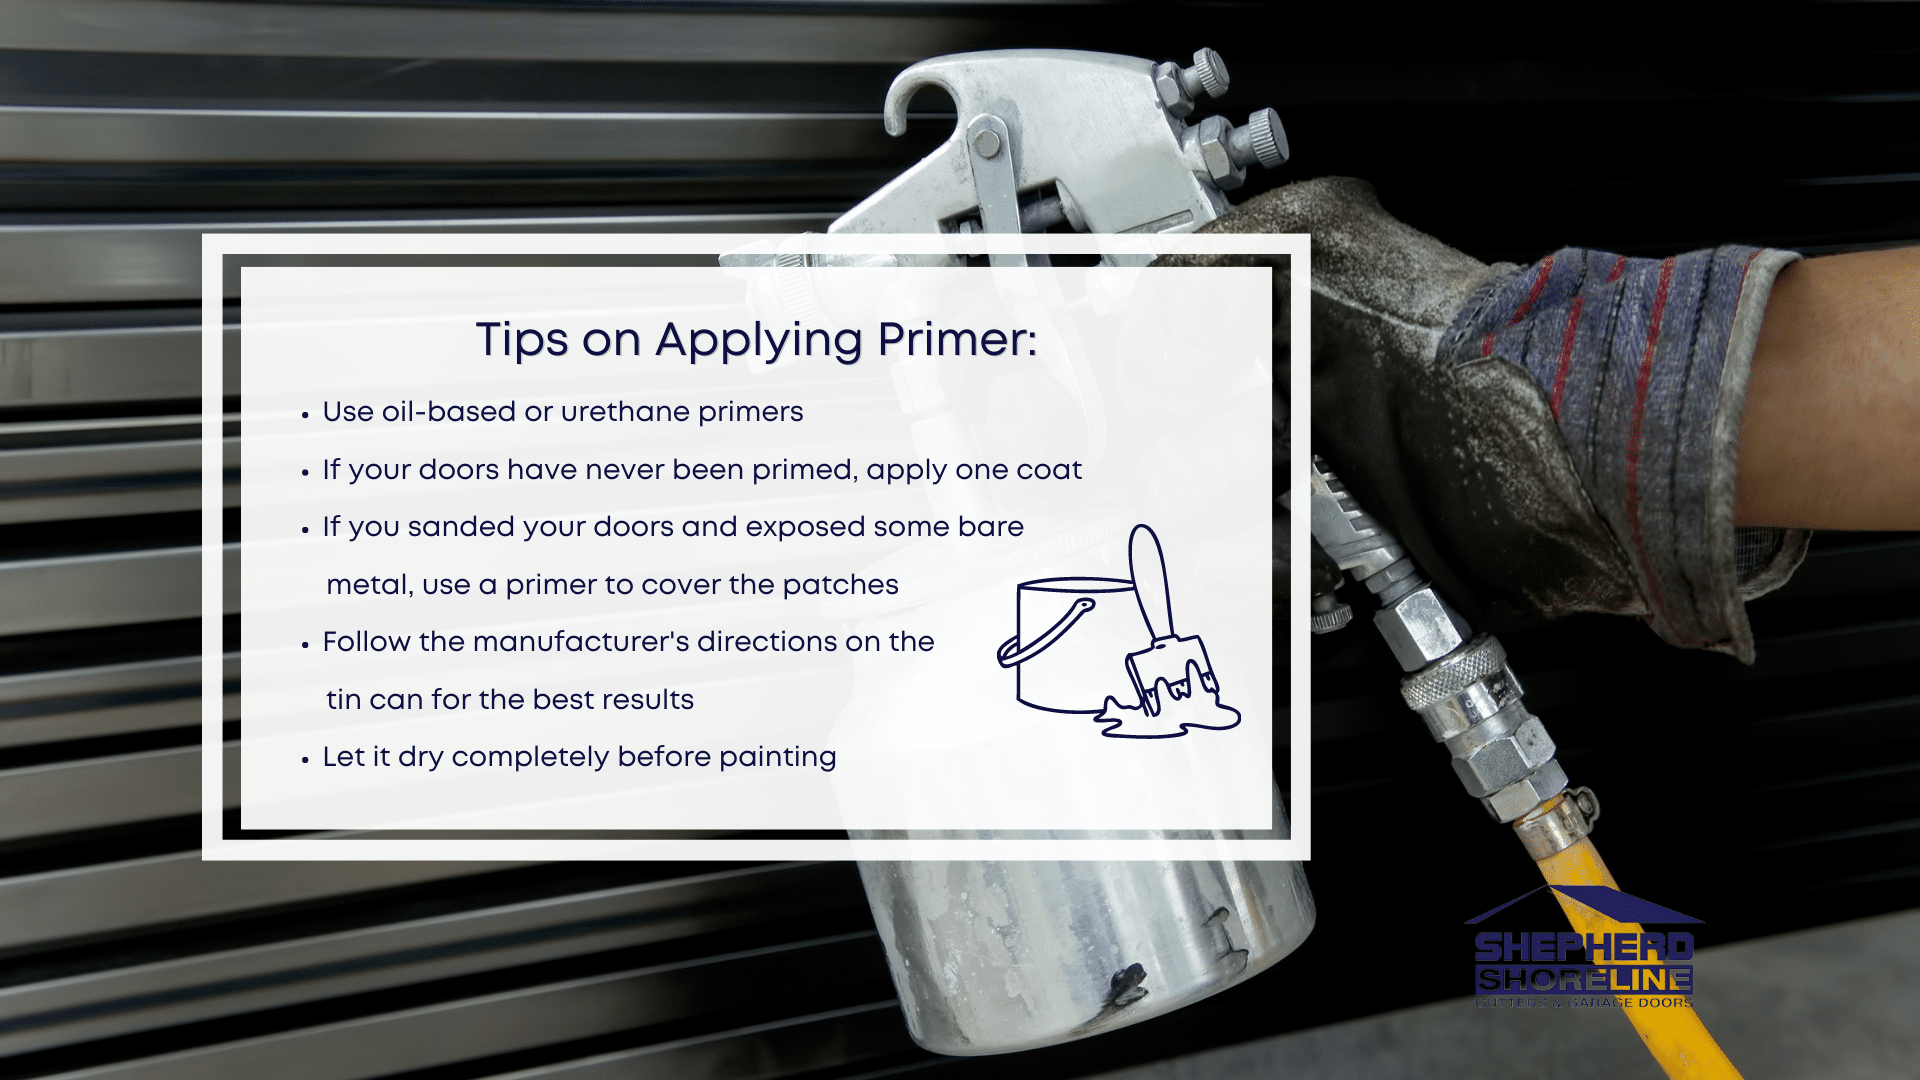 Infographic image of tips on applying primer